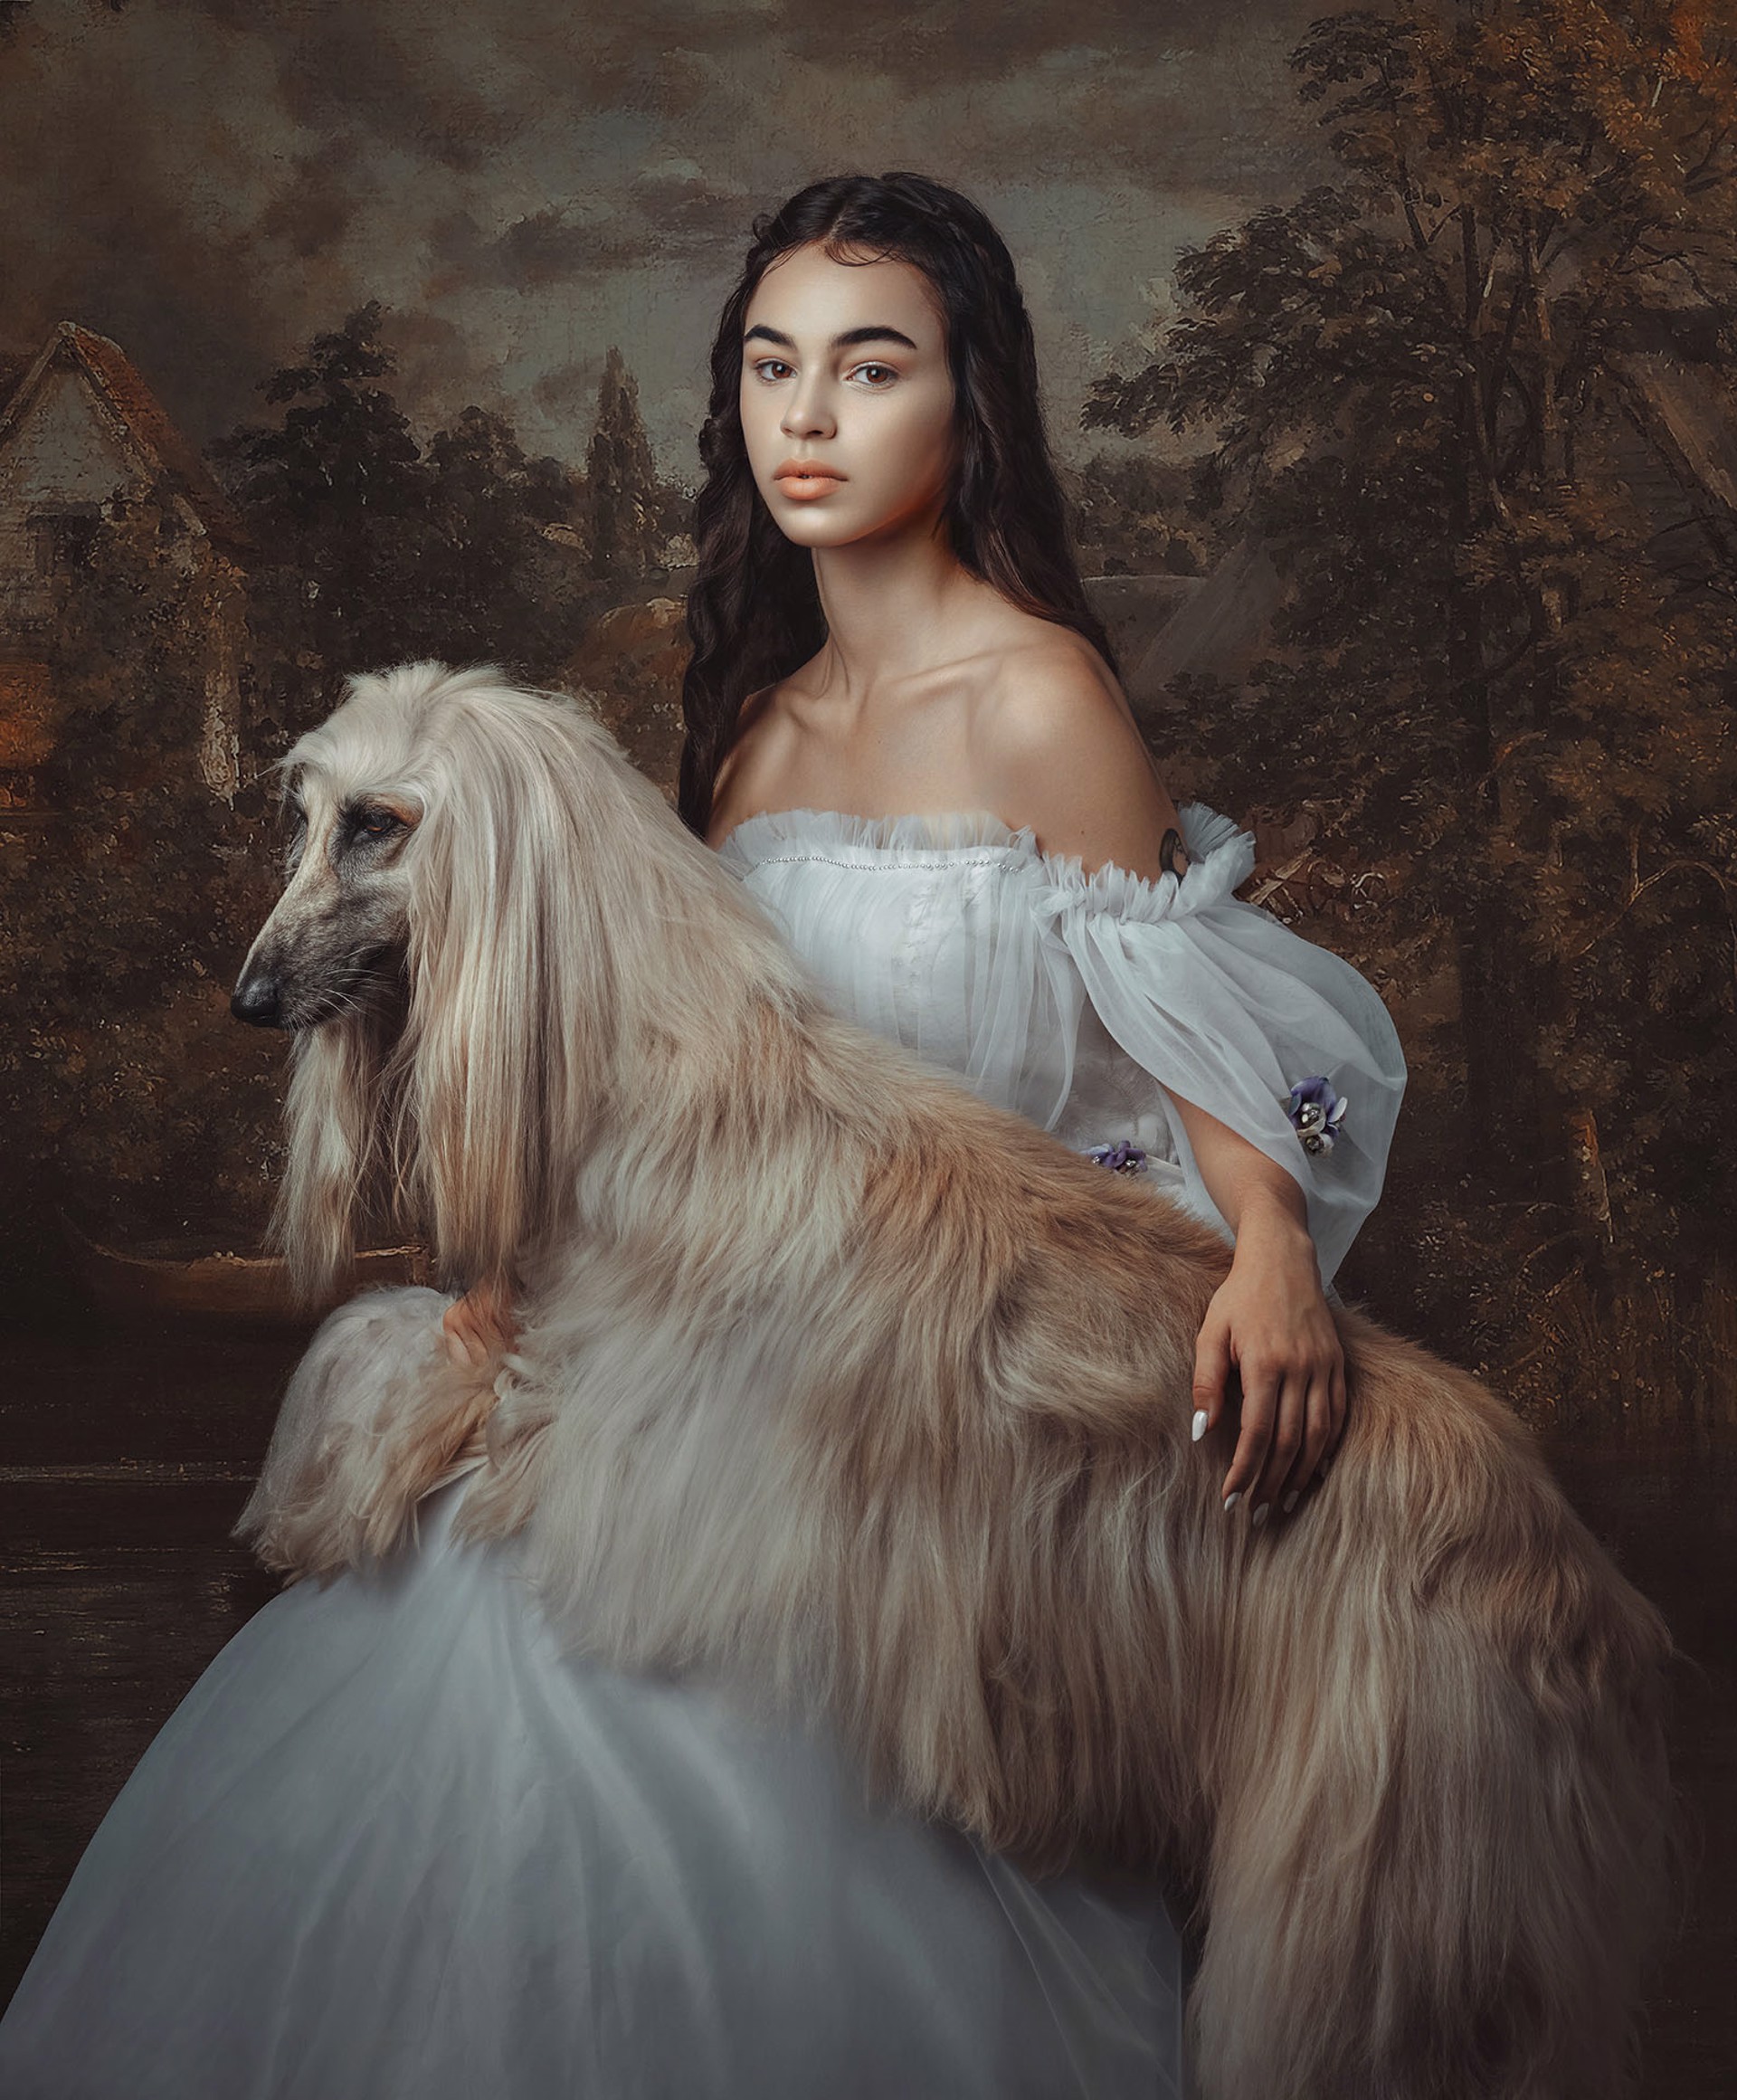 The Lady with a Dog by Carlos Gamez de Francisco